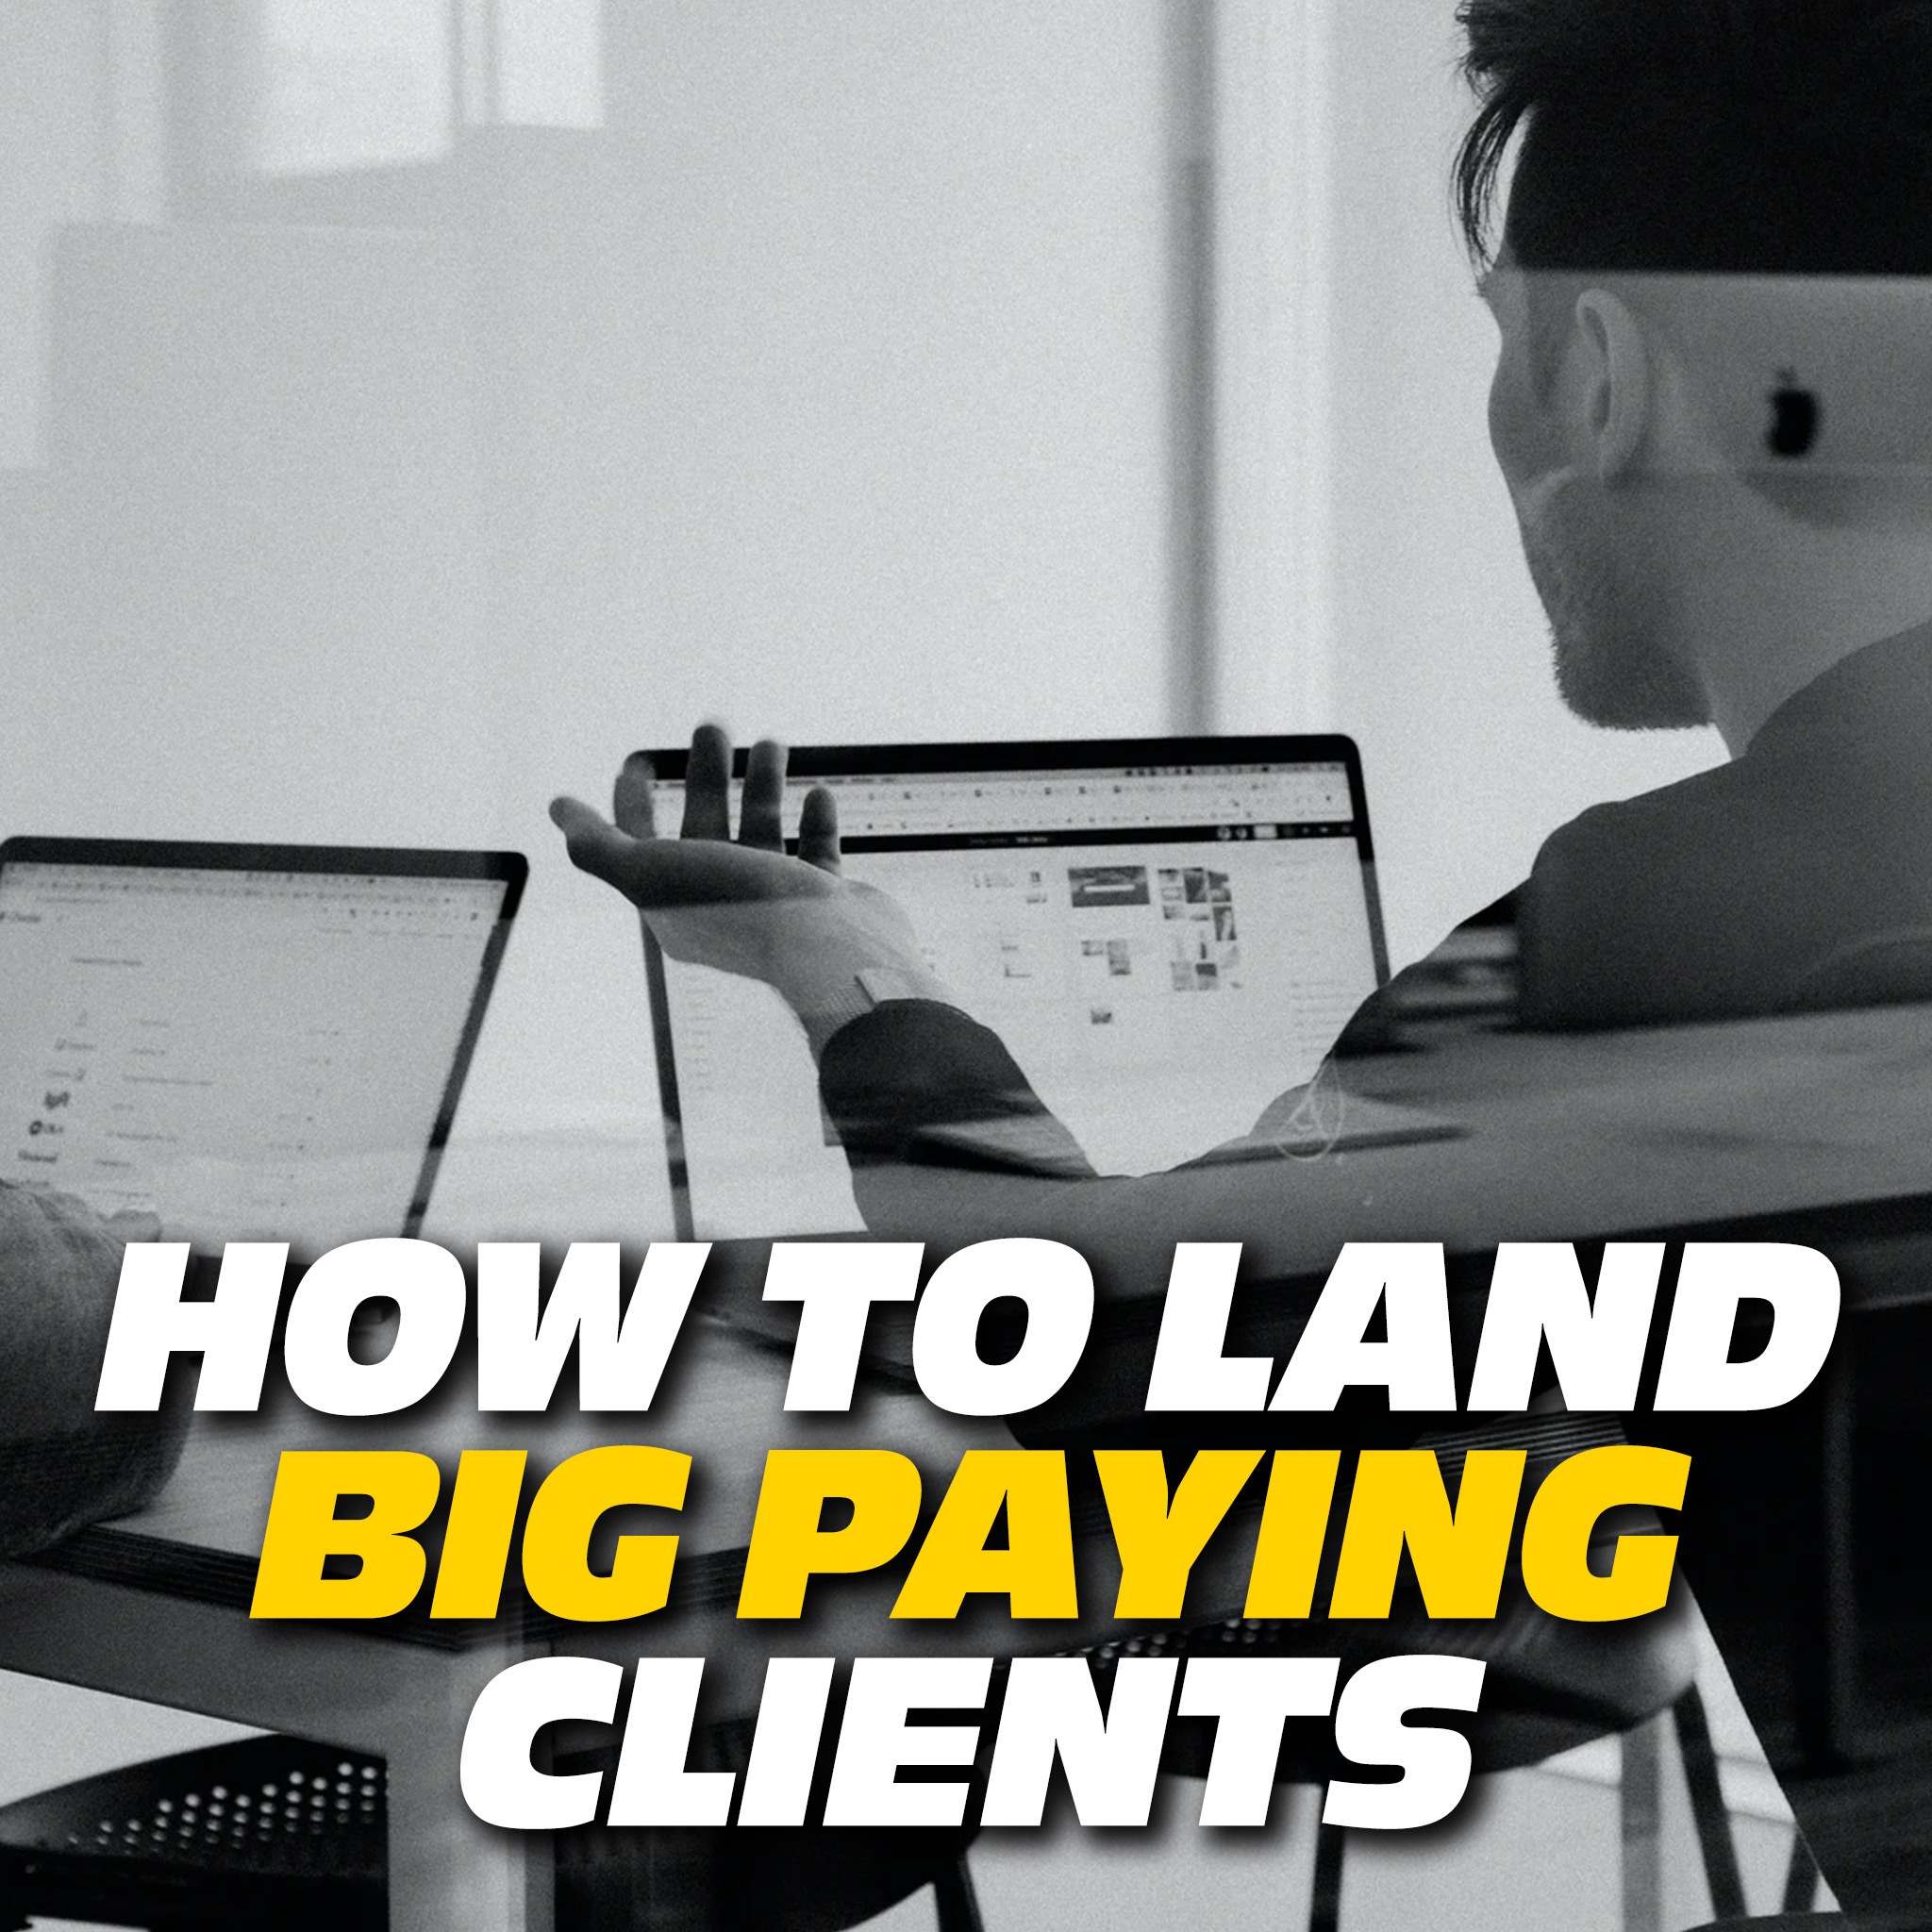 How to Land Big Paying Clients